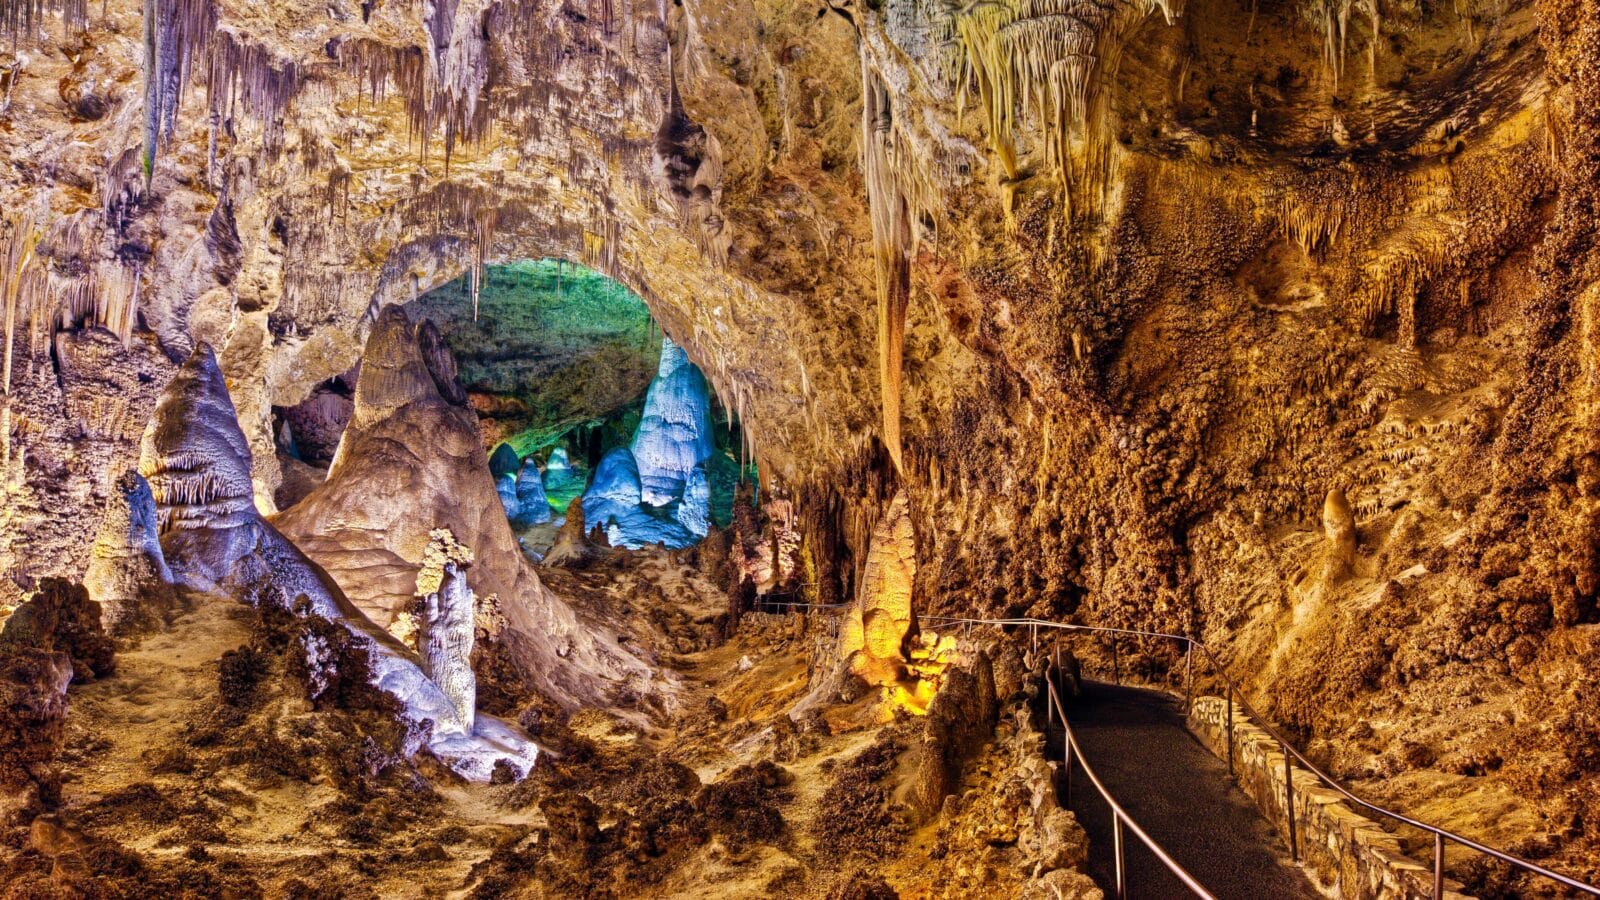 <p>Home to a network of over one hundred caves, this New Mexico national park boasts gorgeous displays of stalactites and massive chambers connected by trails you can hike with your family. Several caves are open to the public and ready for your exploration.</p><p>If you’re exploring the park without a guide, take the famous Big Room Trail, which descends into the depths of the earth via the steep Natural Entrance. From there, you can better look at the spectacular geological formations offered by the 3.1-hectare Big Room and meet the Devil’s Spring, the Iceberg Rock, and the Whale’s Mouth.</p>